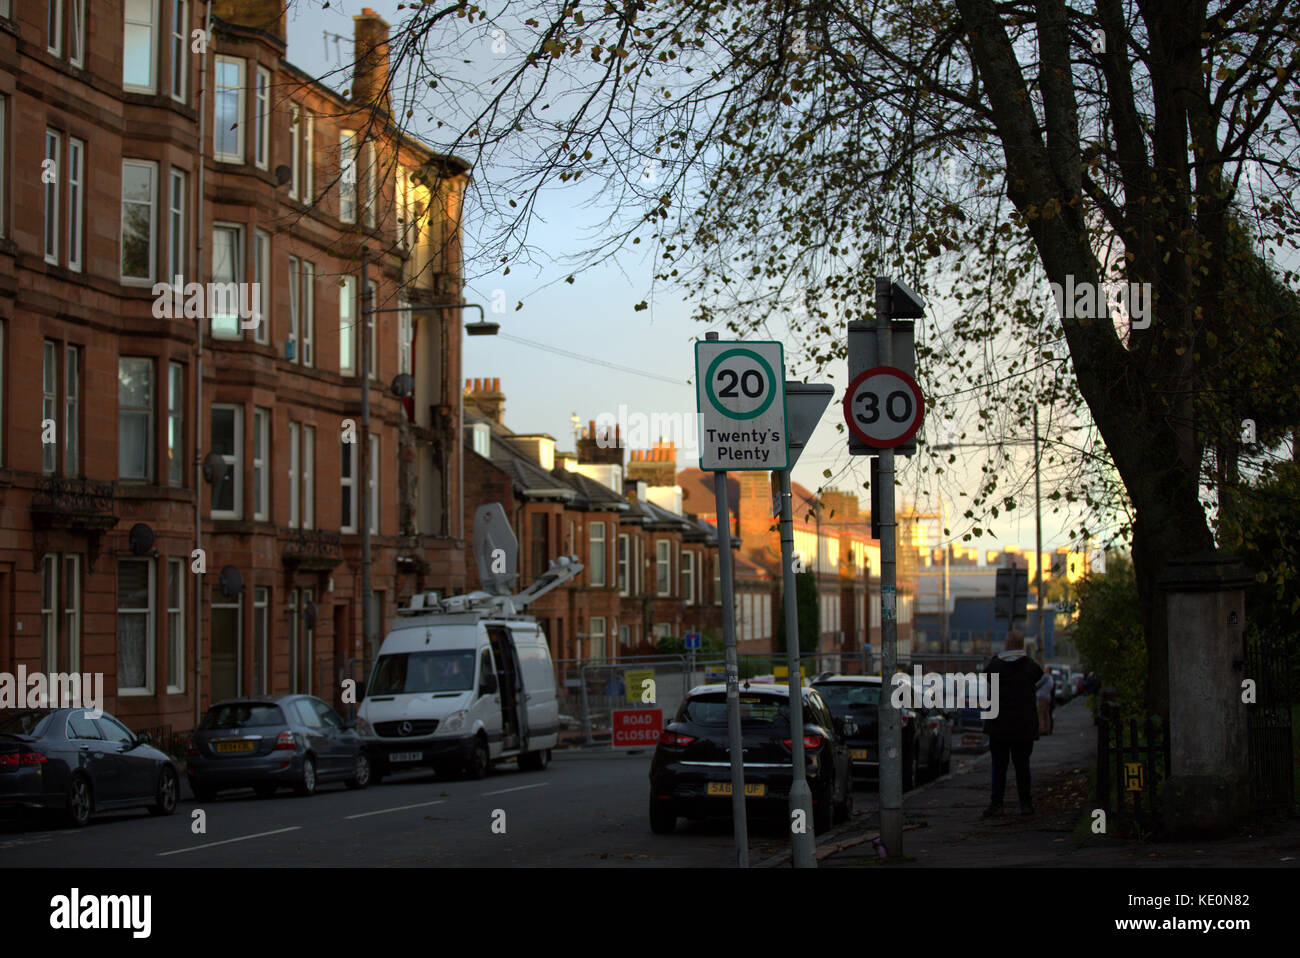 Glasgow, Scotland, UK.17th October. UK Weather,  After Hurricane Ophelia hit the city an unoccupied Tenement in Crosshill collapsed as Storm battered Scotland. Credit: gerard ferry/Alamy Live News Stock Photo